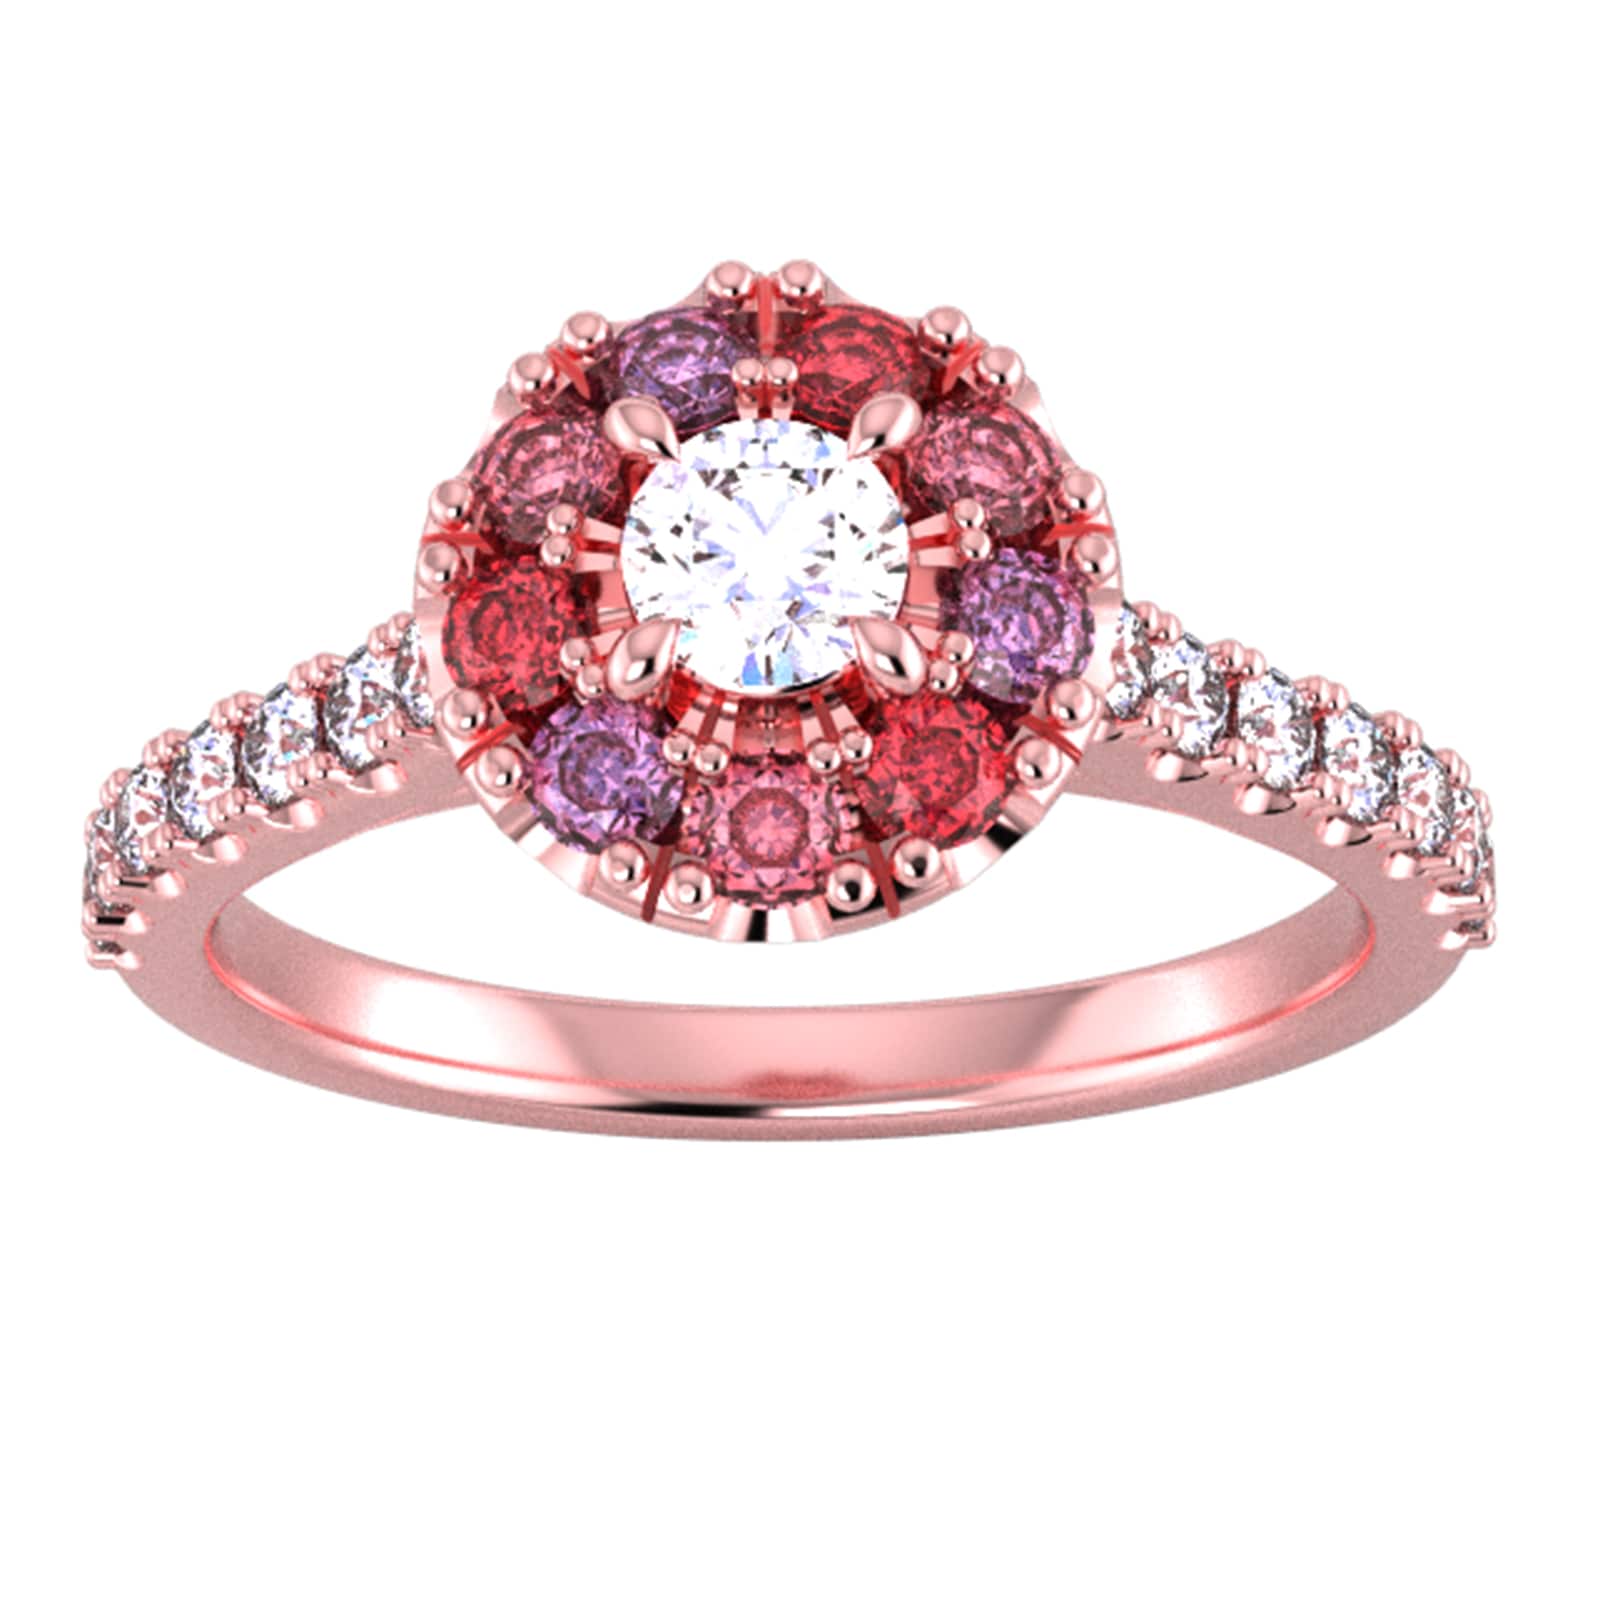 18ct Rose Gold Diamond & Red, Pink, Purple Sapphire Halo Ring - Ring Size D